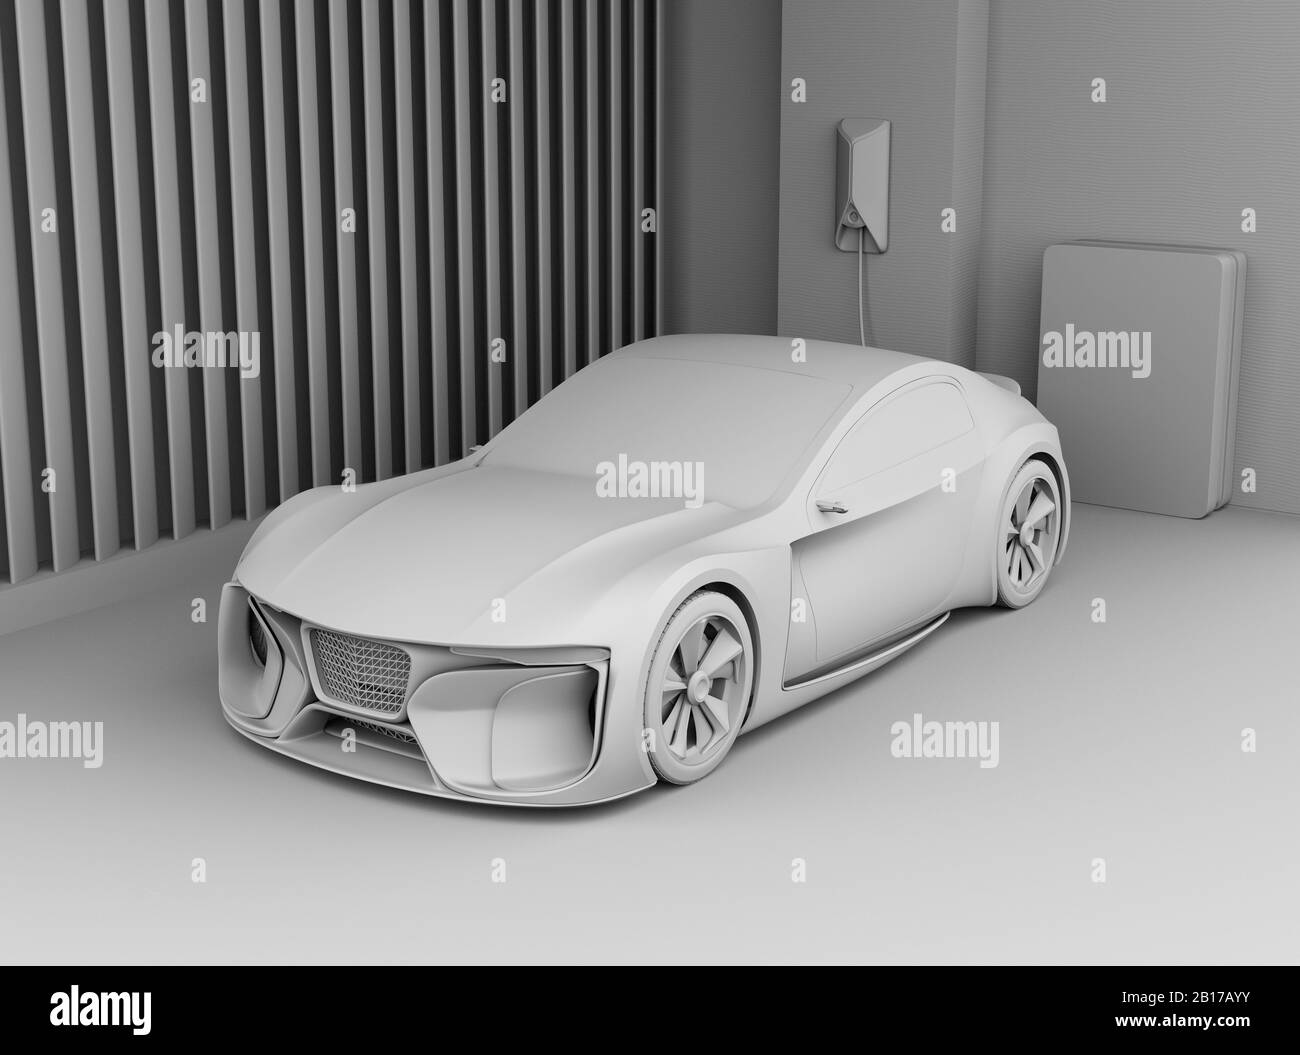 Electric sports car connect to power supply at home. Sustainable lifestyle concept. 3D clay rendering image. Stock Photo